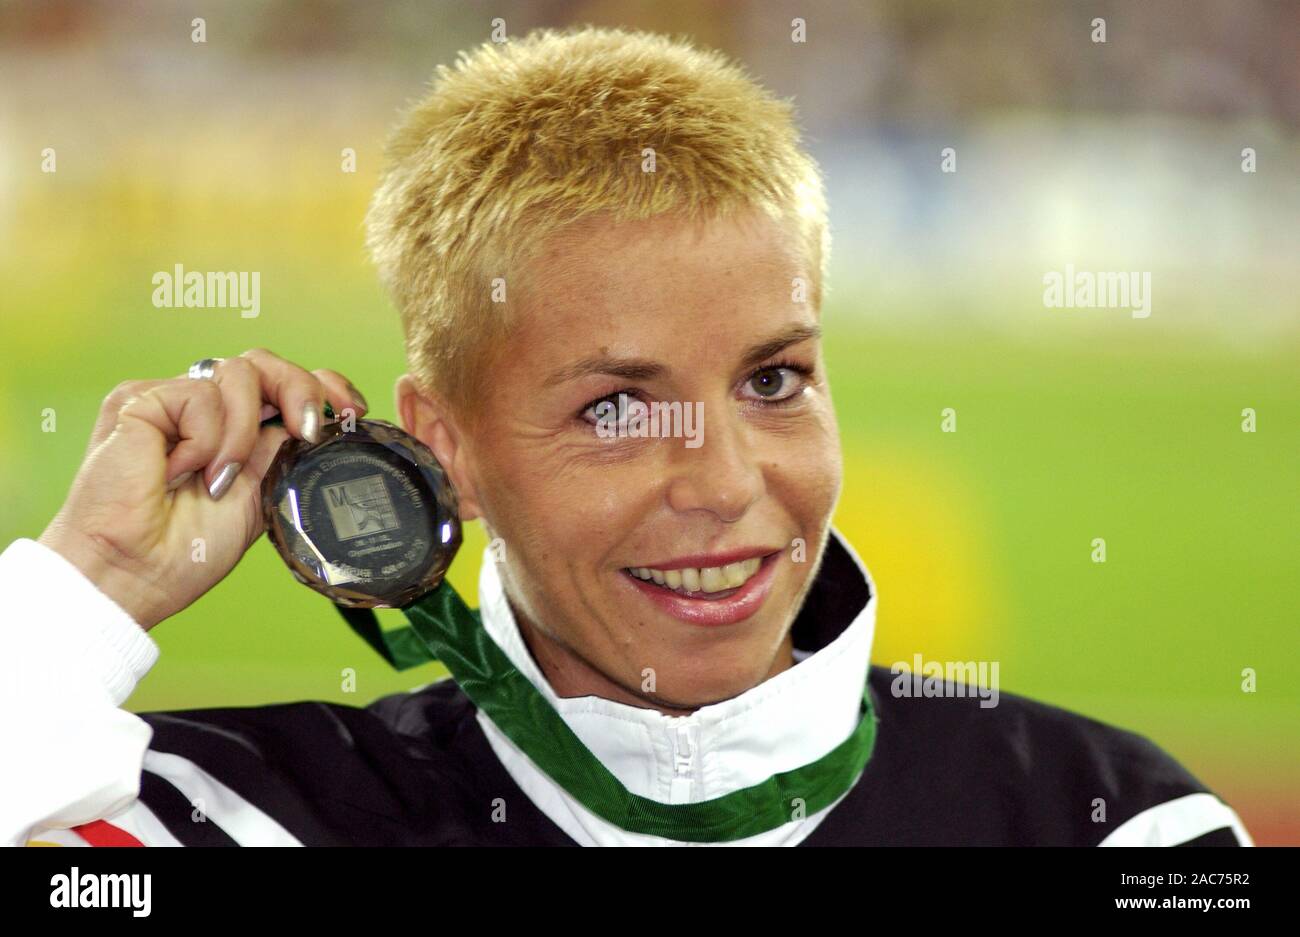 Olympic Stadium Munich Germany 8.8.2002, European Athletics Championships, GRIT BREUER (GER) with silverMedal Stock Photo